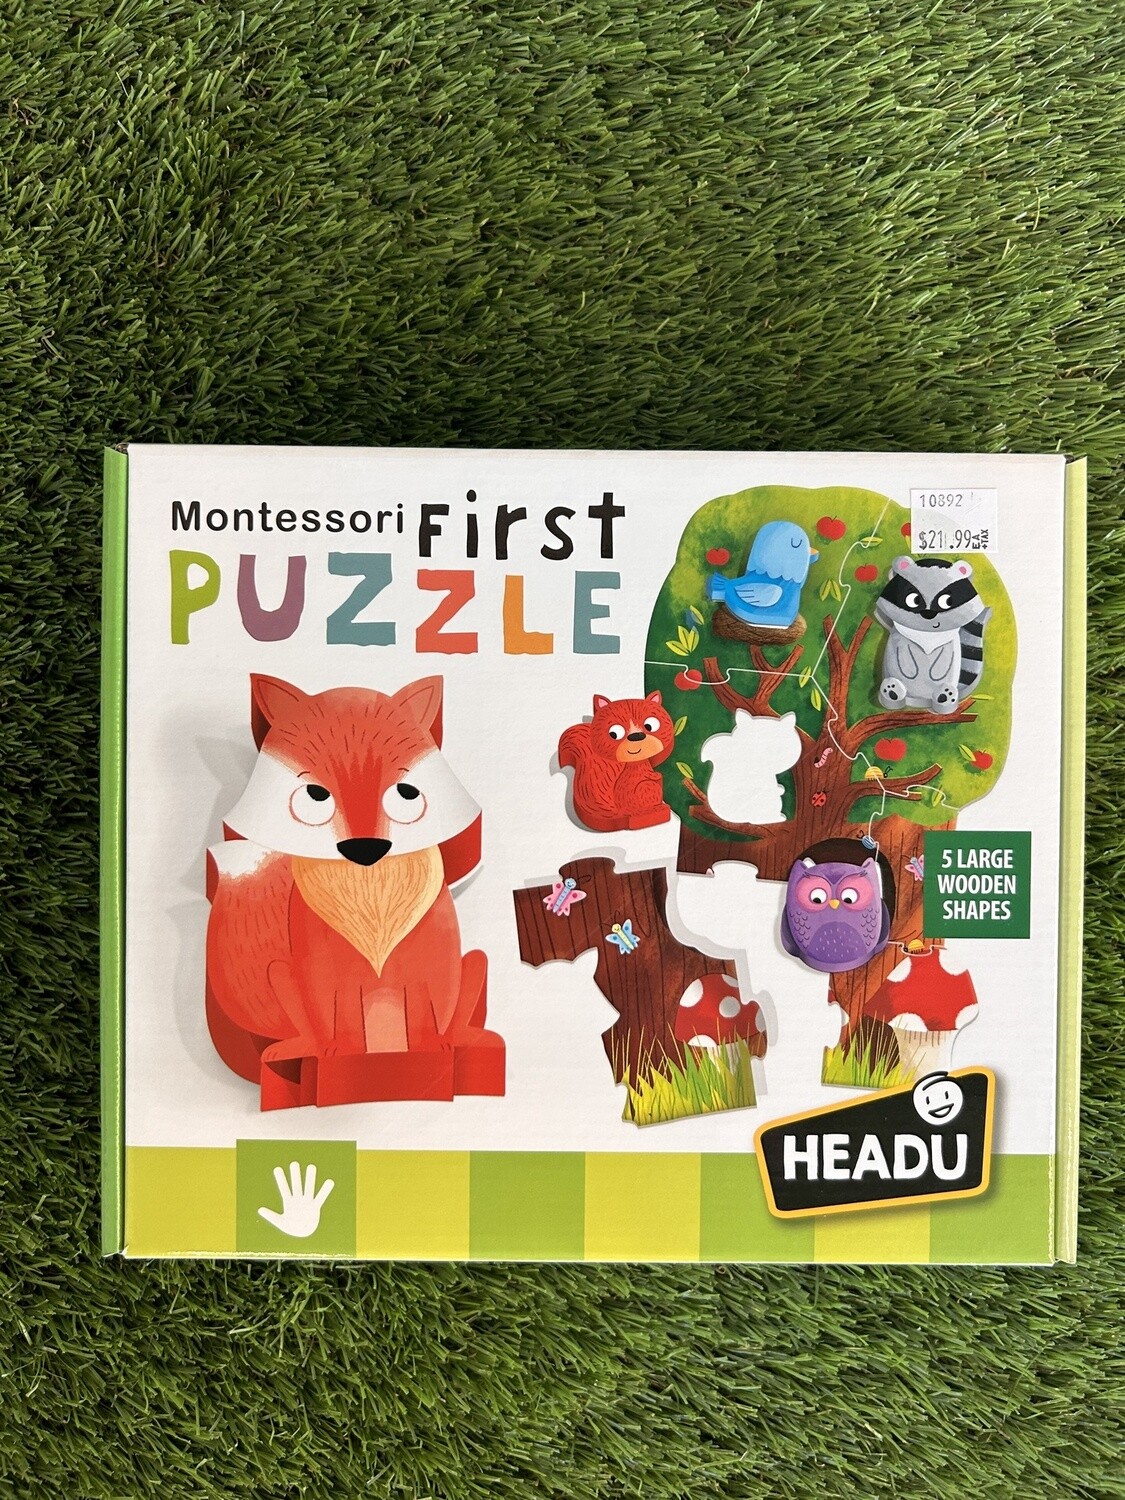 Montessori First Puzzle the Forest